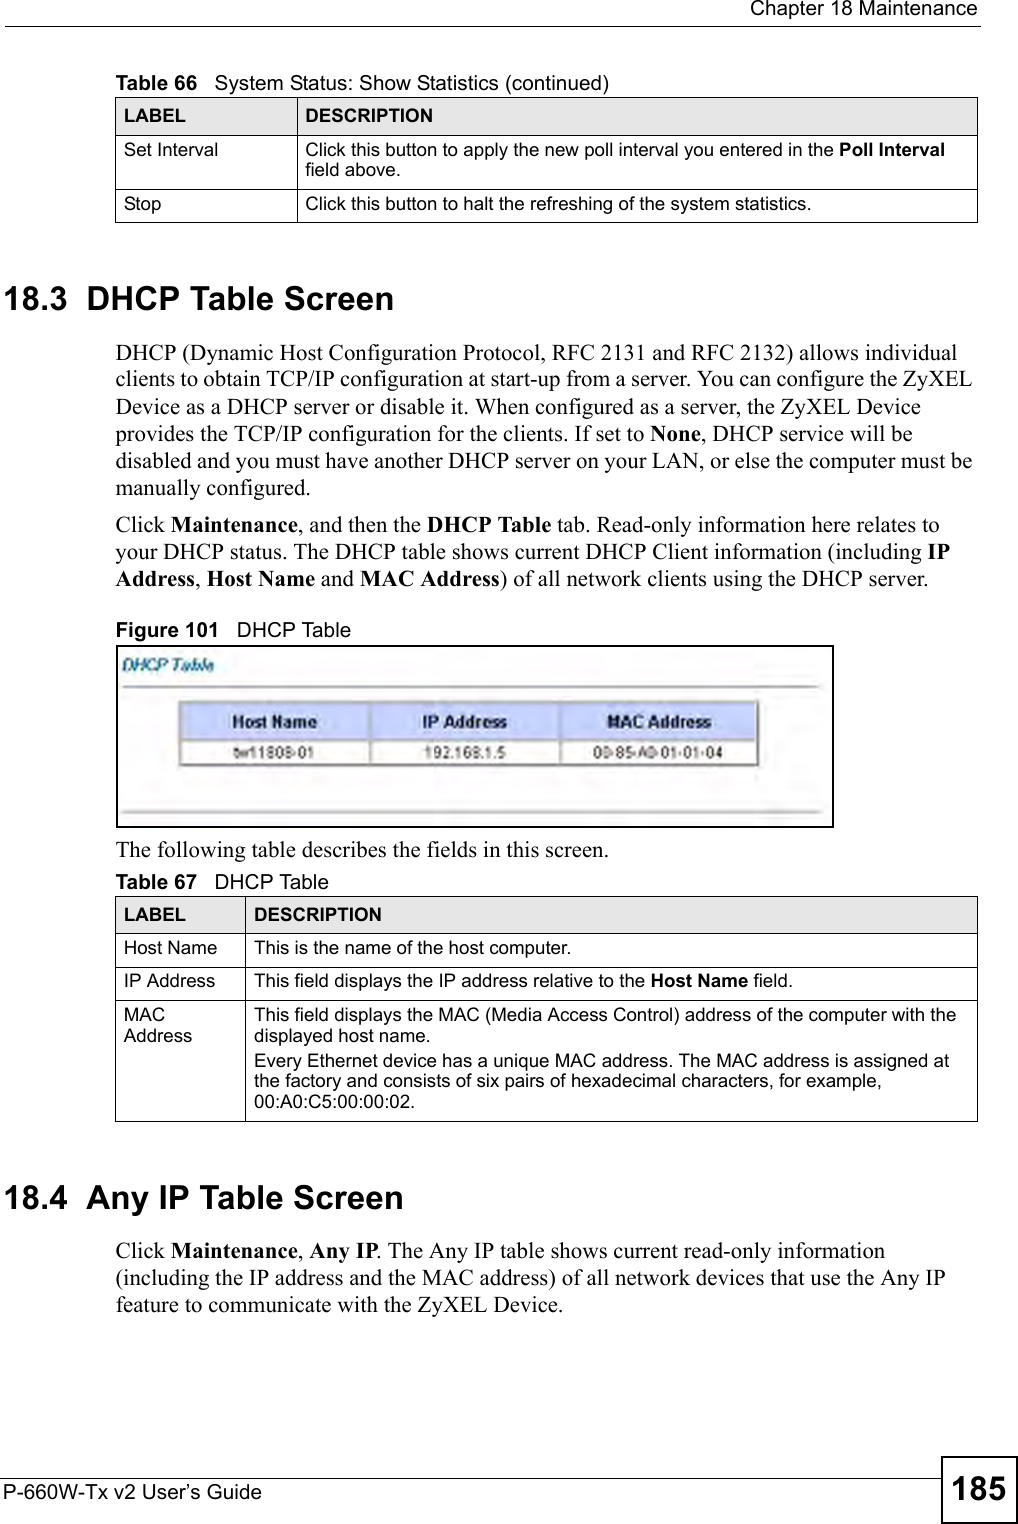  Chapter 18 MaintenanceP-660W-Tx v2 User’s Guide 18518.3  DHCP Table Screen DHCP (Dynamic Host Configuration Protocol, RFC 2131 and RFC 2132) allows individual clients to obtain TCP/IP configuration at start-up from a server. You can configure the ZyXEL Device as a DHCP server or disable it. When configured as a server, the ZyXEL Device provides the TCP/IP configuration for the clients. If set to None, DHCP service will be disabled and you must have another DHCP server on your LAN, or else the computer must be manually configured.Click Maintenance, and then the DHCP Table tab. Read-only information here relates to your DHCP status. The DHCP table shows current DHCP Client information (including IP Address, Host Name and MAC Address) of all network clients using the DHCP server.Figure 101   DHCP TableThe following table describes the fields in this screen.  18.4  Any IP Table Screen Click Maintenance, Any IP. The Any IP table shows current read-only information (including the IP address and the MAC address) of all network devices that use the Any IP feature to communicate with the ZyXEL Device. Set Interval Click this button to apply the new poll interval you entered in the Poll Interval field above.Stop Click this button to halt the refreshing of the system statistics.Table 66   System Status: Show Statistics (continued)LABEL DESCRIPTIONTable 67   DHCP TableLABEL DESCRIPTIONHost Name This is the name of the host computer.IP Address This field displays the IP address relative to the Host Name field. MAC Address This field displays the MAC (Media Access Control) address of the computer with the displayed host name.Every Ethernet device has a unique MAC address. The MAC address is assigned at the factory and consists of six pairs of hexadecimal characters, for example, 00:A0:C5:00:00:02.